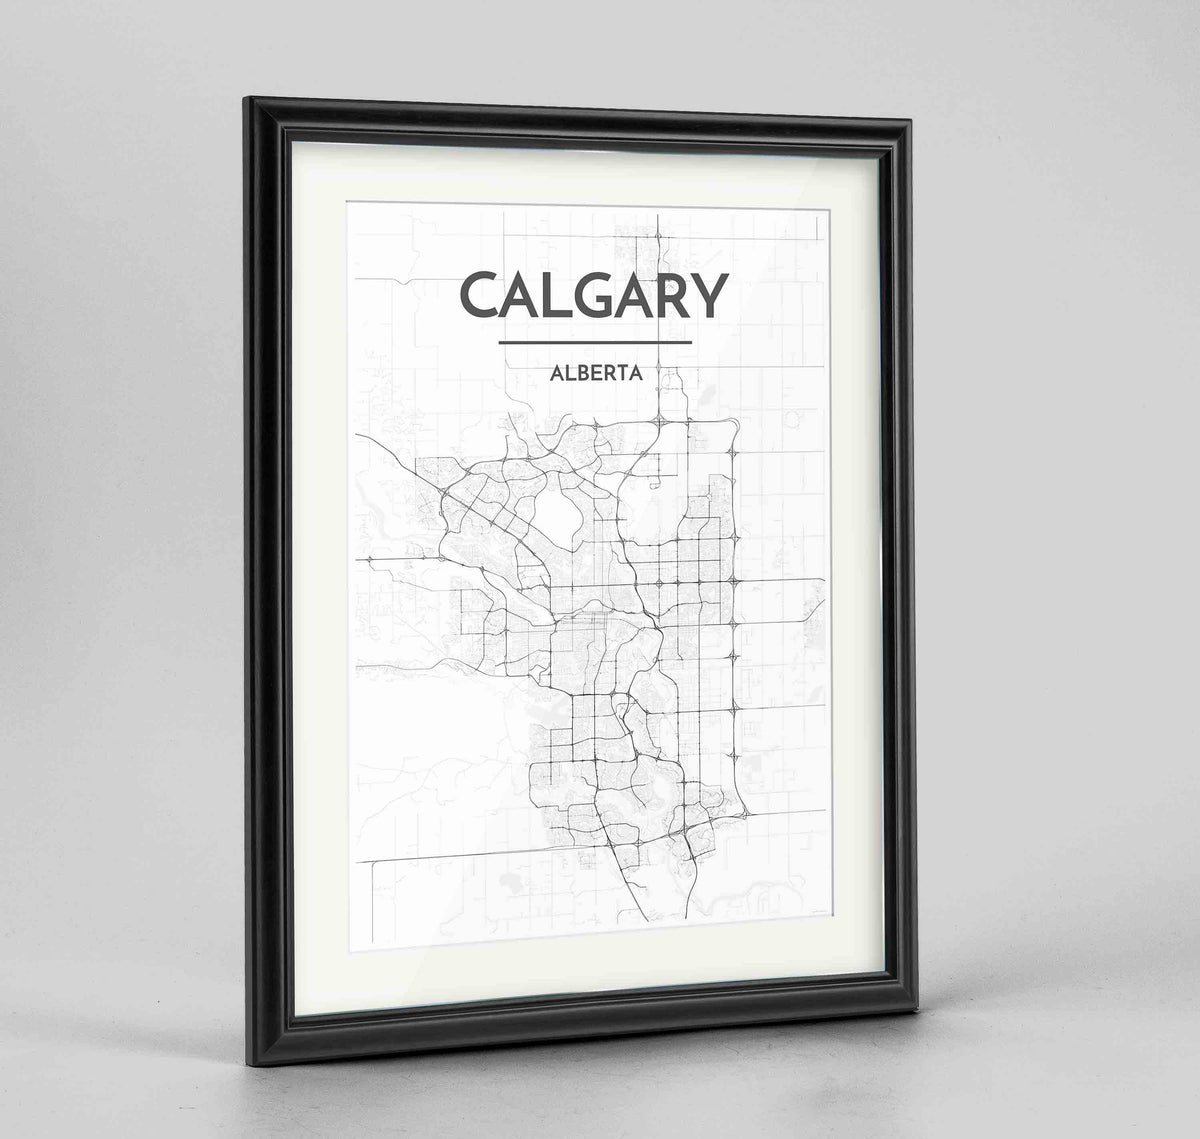 Framed Calgary City Map 24x36&quot; Traditional Black frame Point Two Design Group